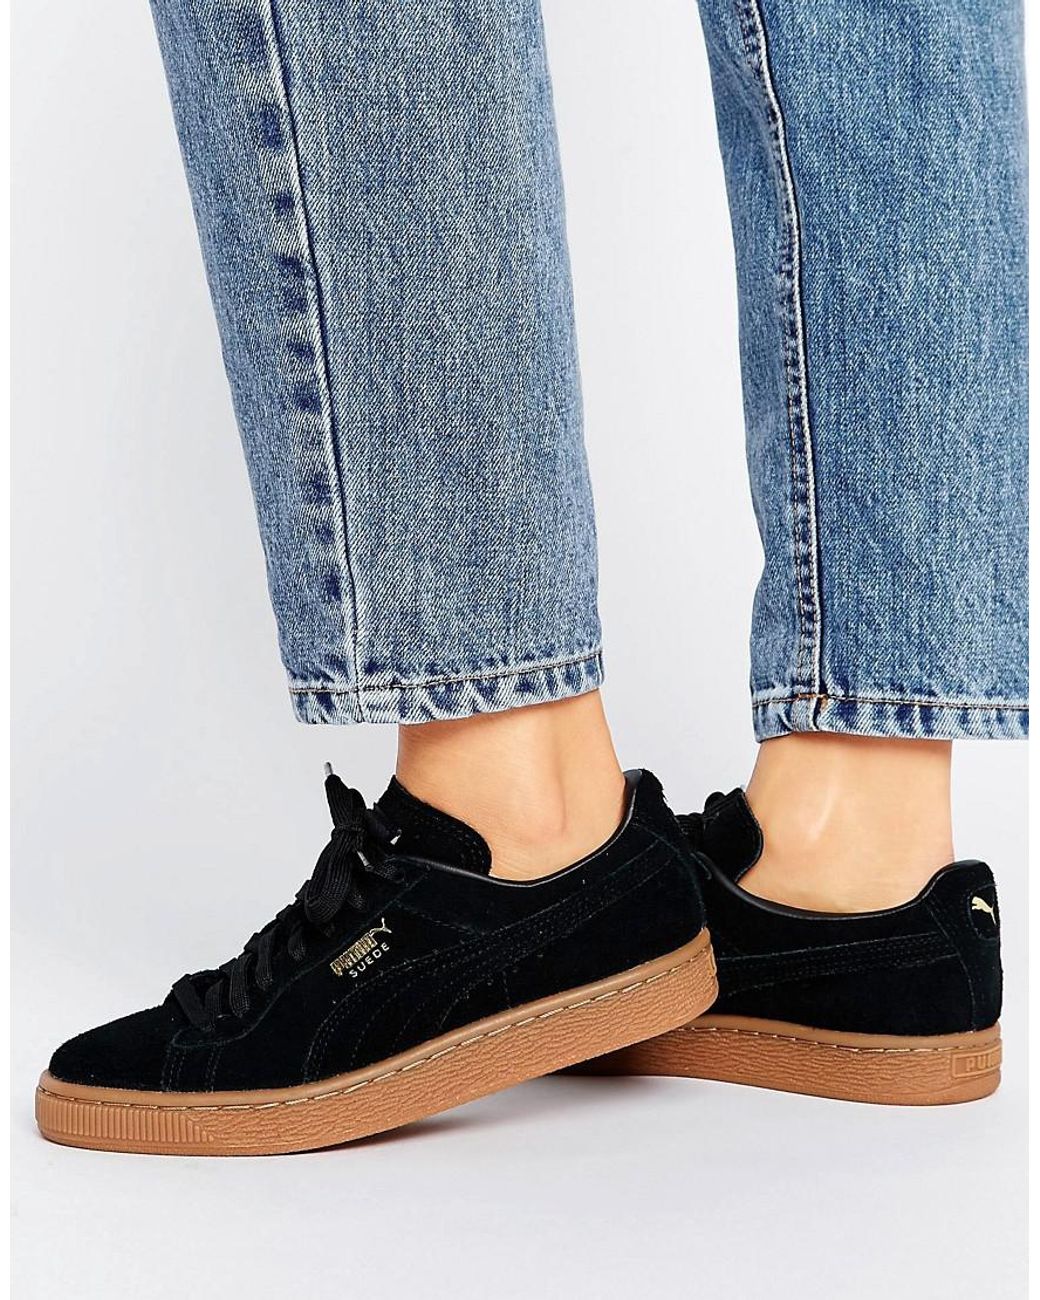 PUMA Black Suede Classic Trainers With Gum Sole | Lyst